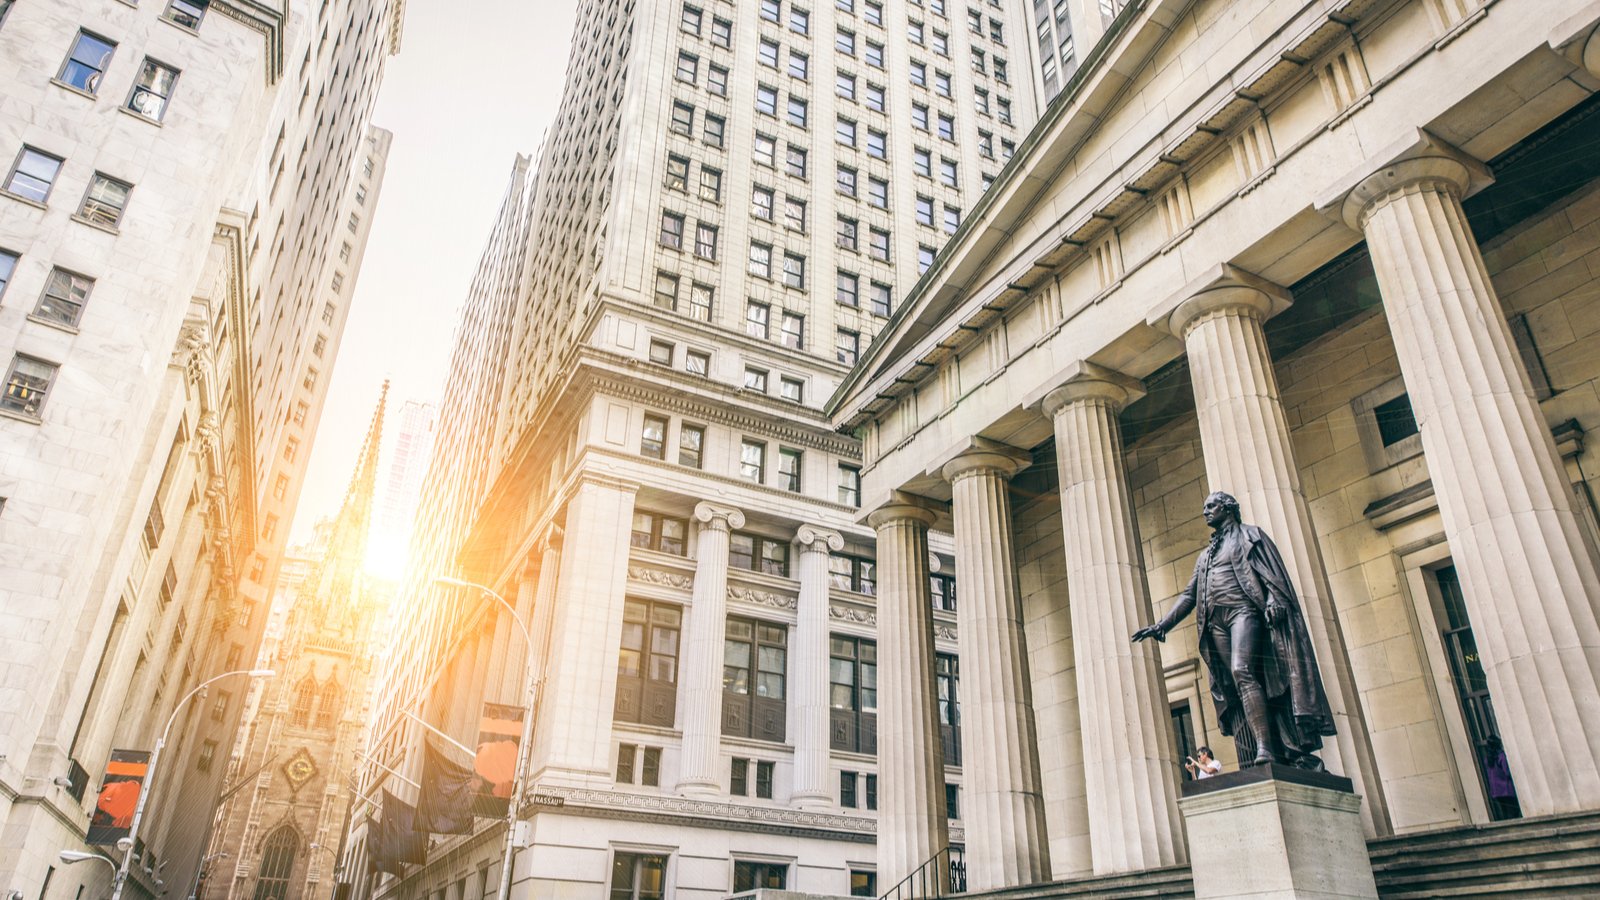 Image of Wall Street with the Washington Statue present representing Pre-Market Stock Movers.